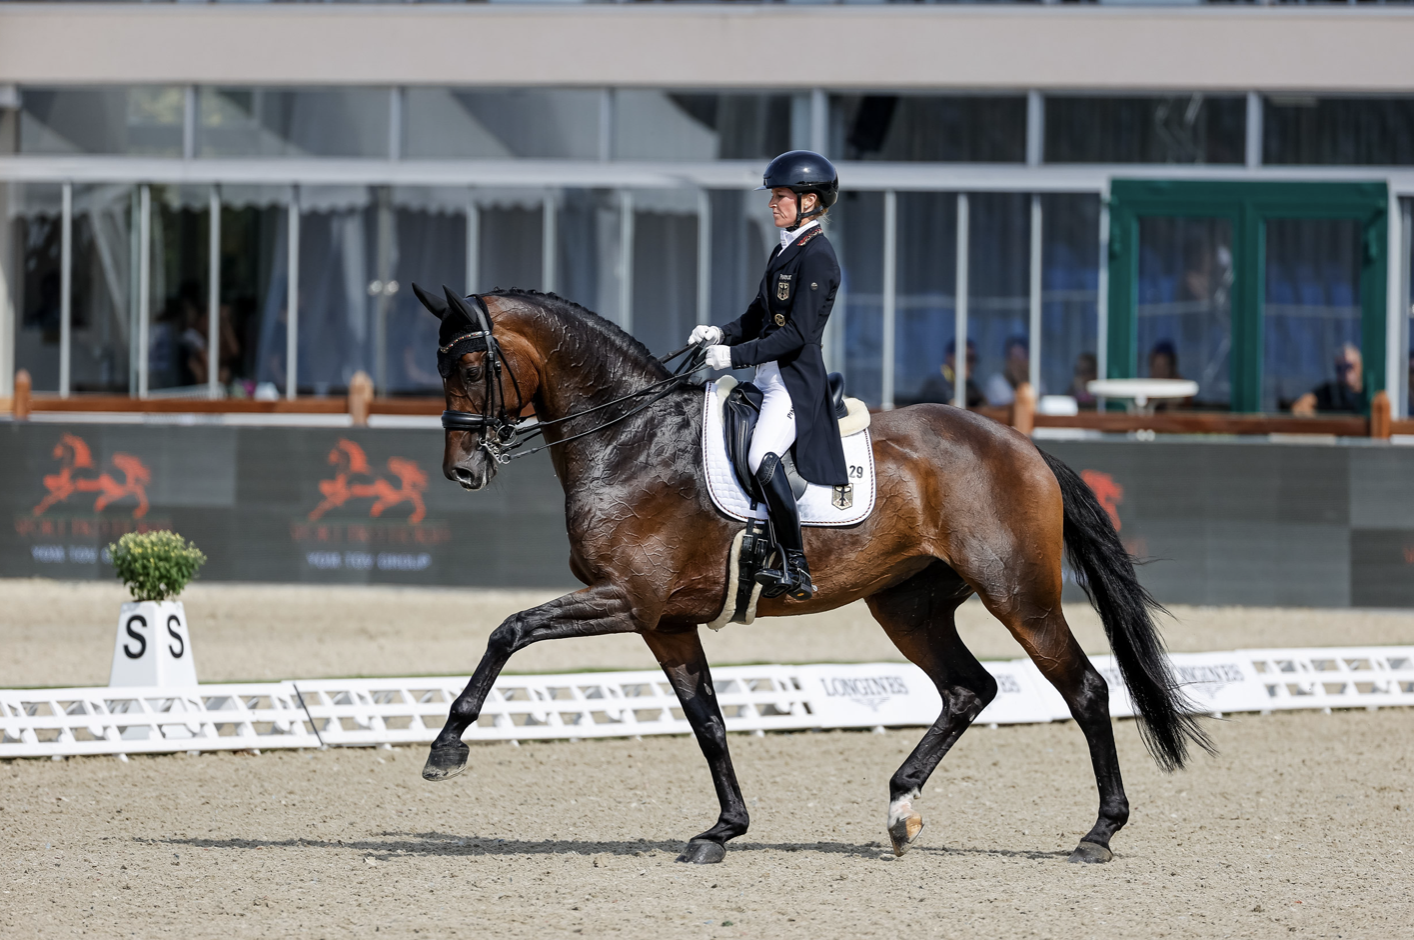 New job for "Mausi": European Team Champion Annabelle becomes broodmare